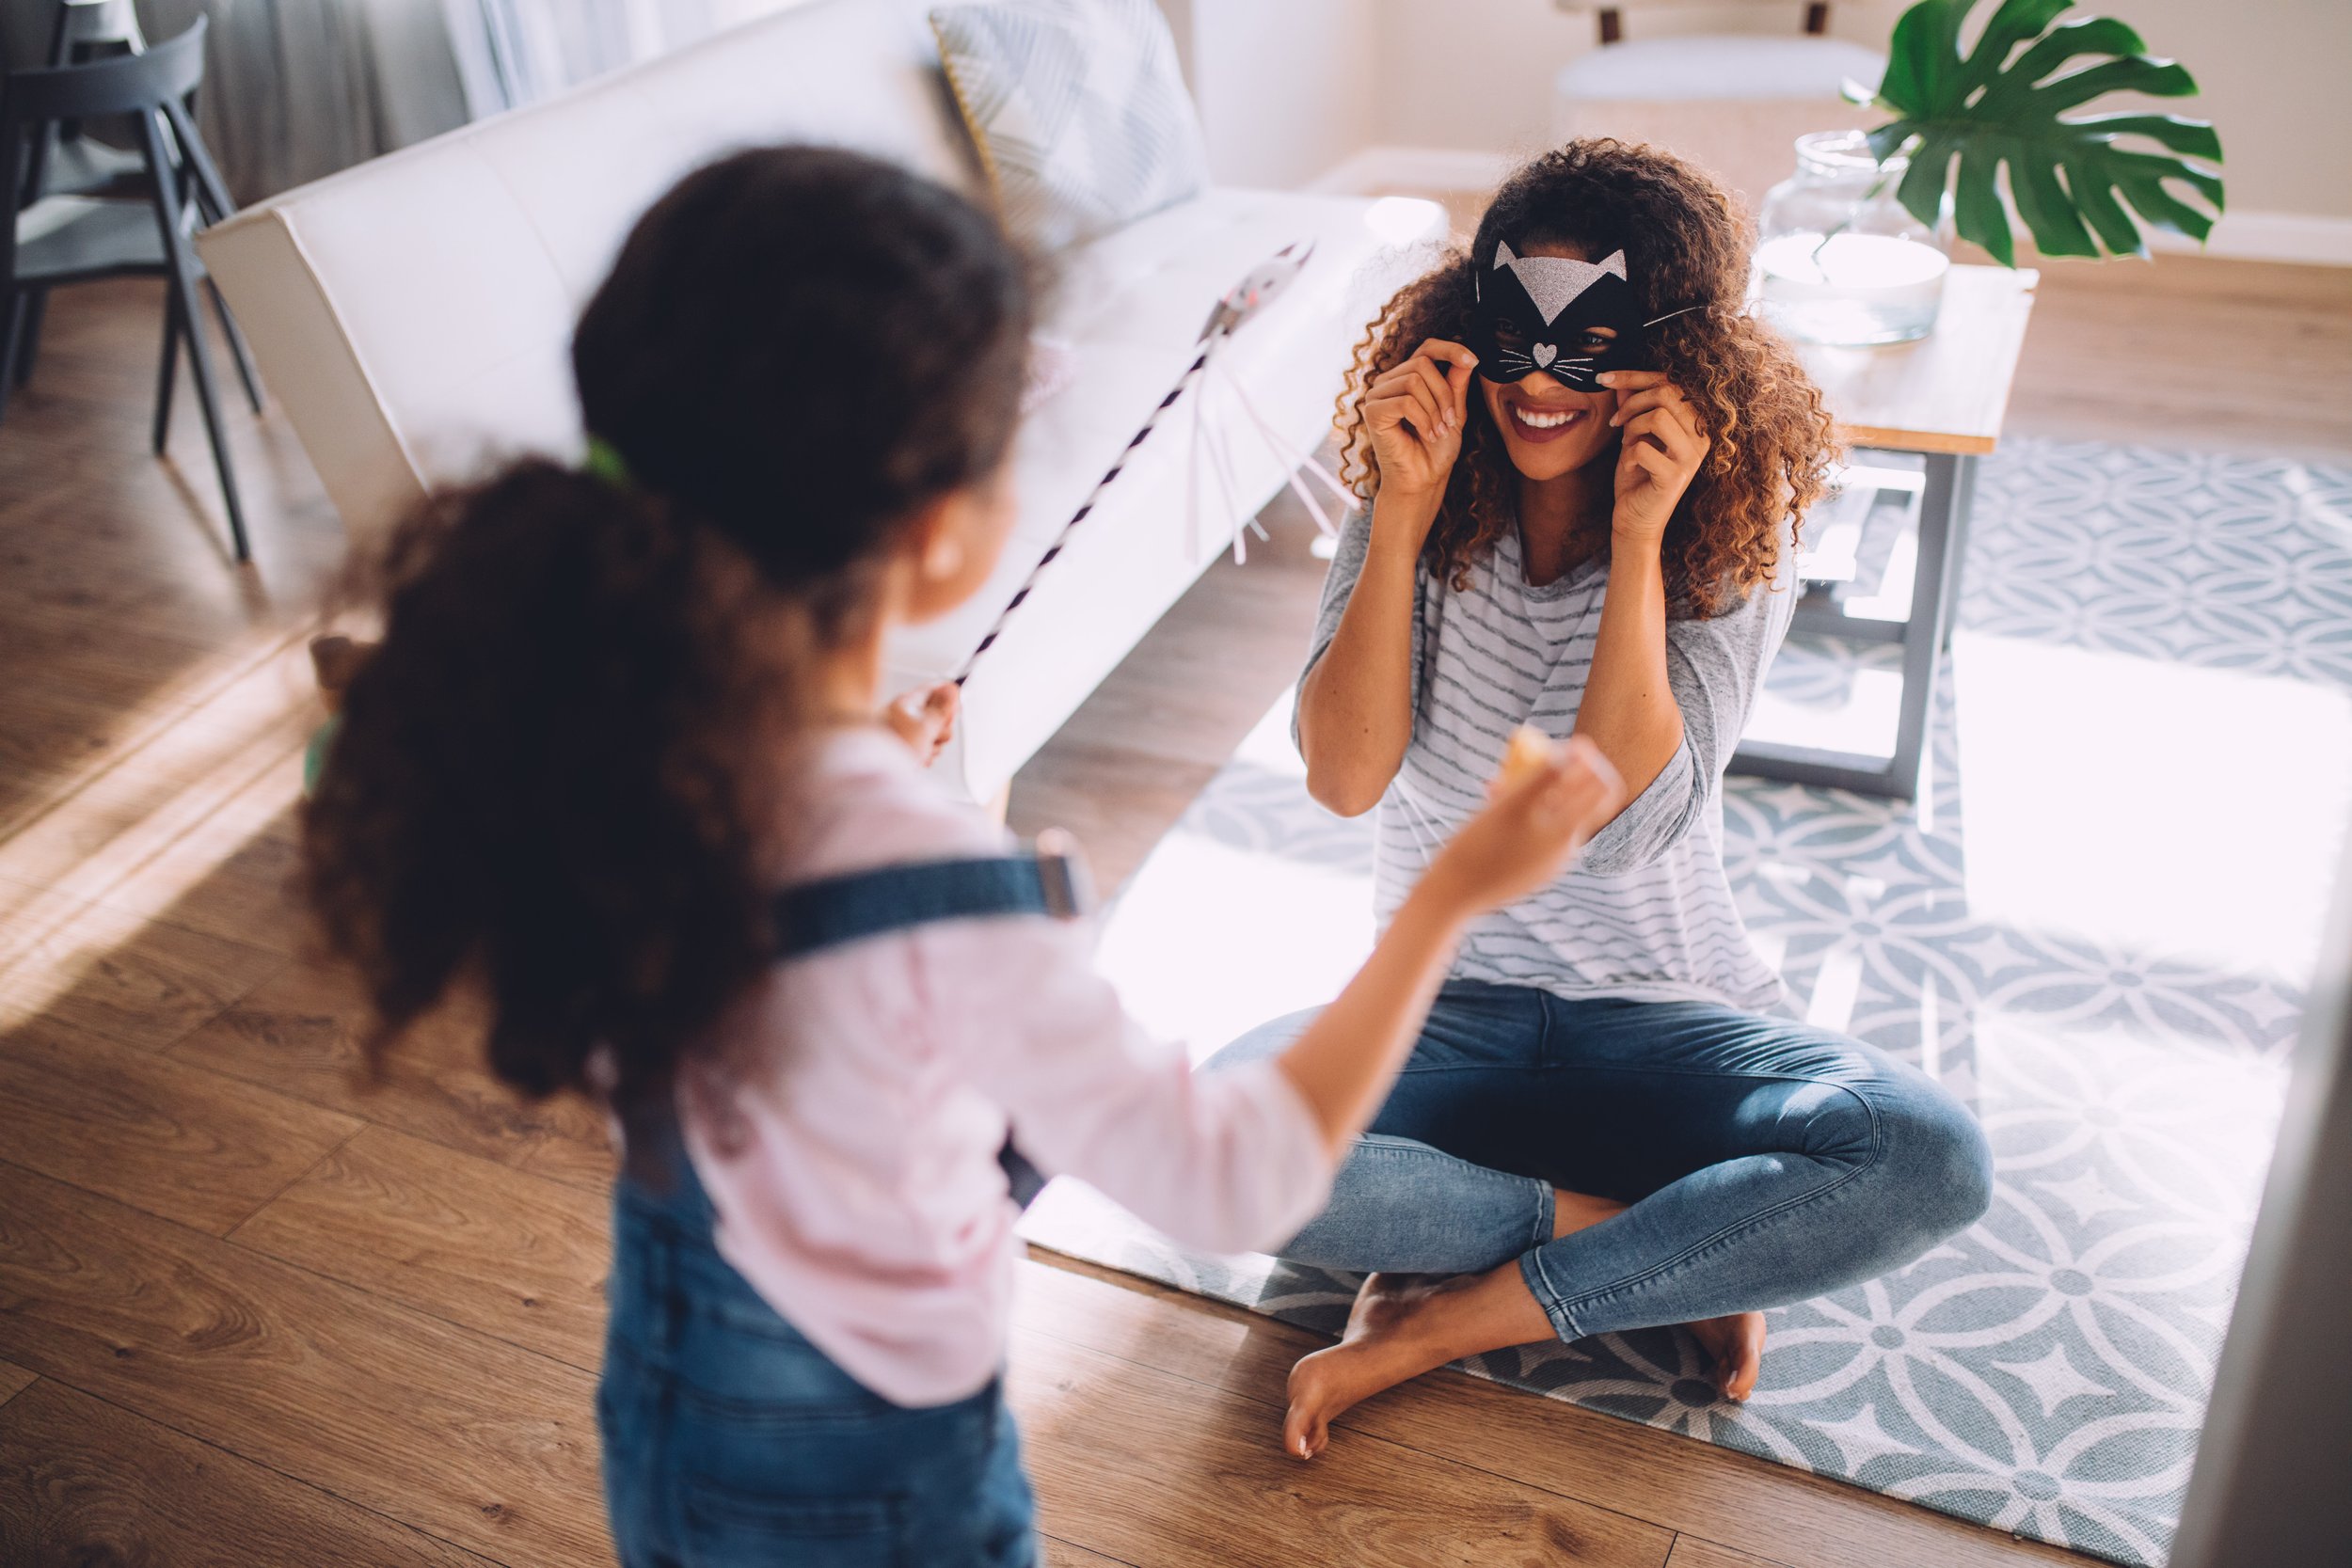 Playful Moments at Home: Mom and Daughter with Mask - Garden City Family Dentistry